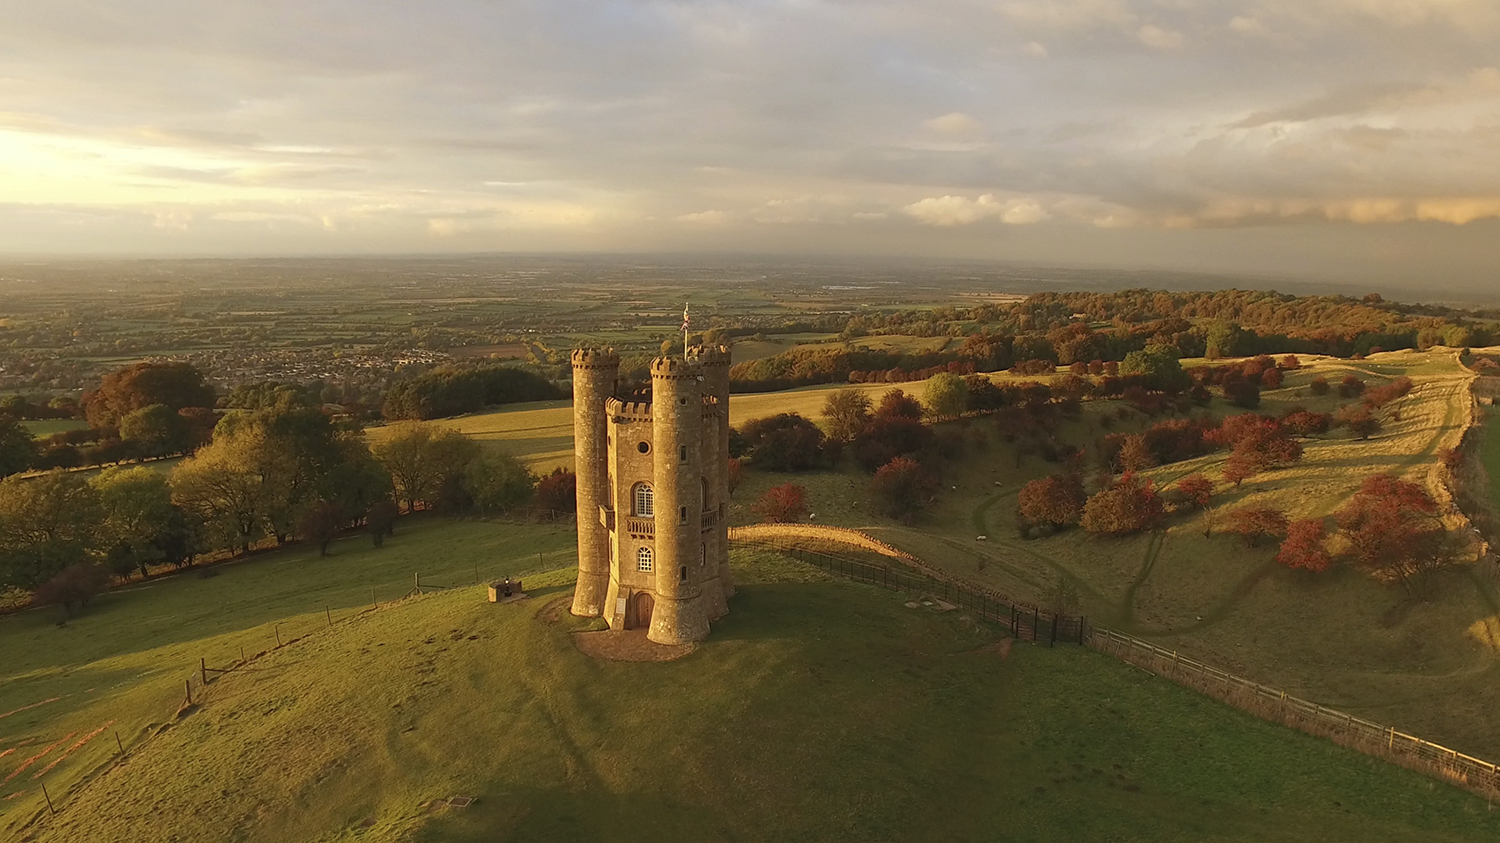 Broadway Tower on the edge of the Cotswold hills during sunset